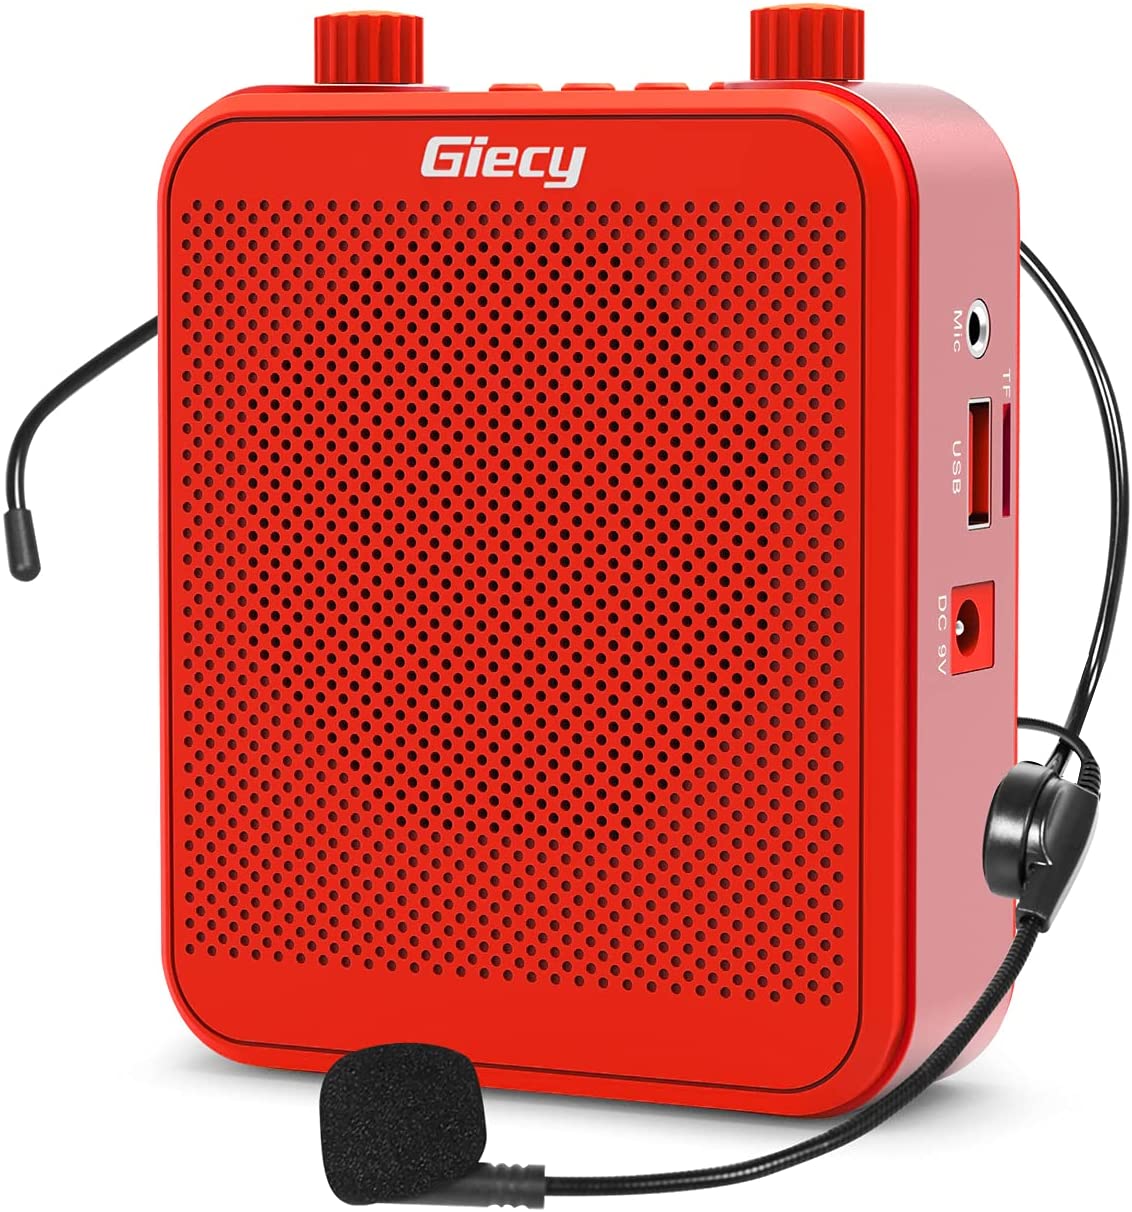 Giecy Voice Amplifier Portable Bluetooth 30W 2800mAh Rechargeable PA System Speaker for Multiple Locations Such as Classroom, Meetings and Outdoors（black/yellow/red）